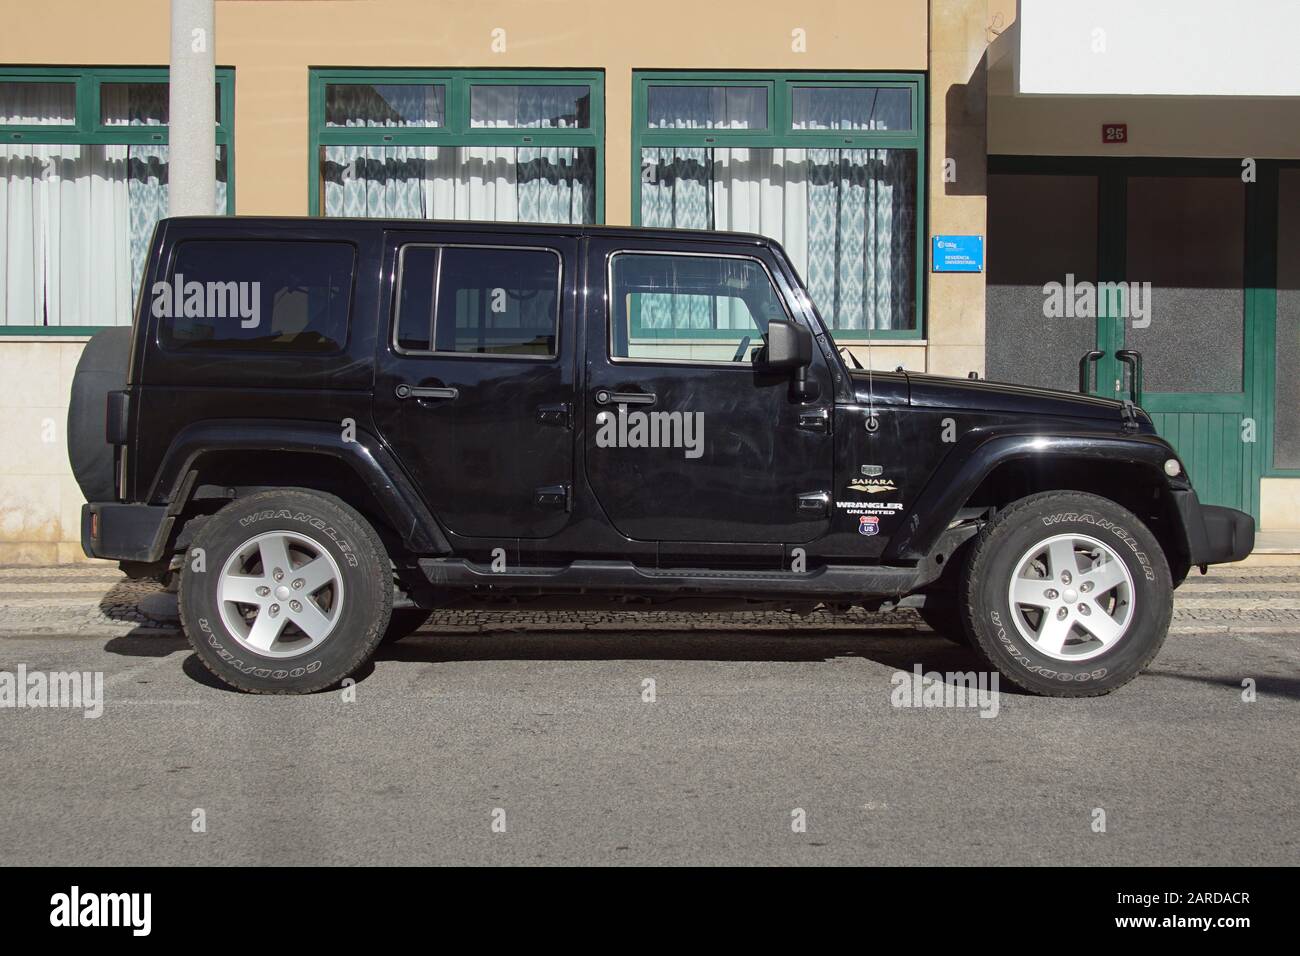 Faro, Portugal - December 28, 2019: Black Wrangler Sahara Unlimited parked b y the side of the road. Nobody in the vehicle. Stock Photo